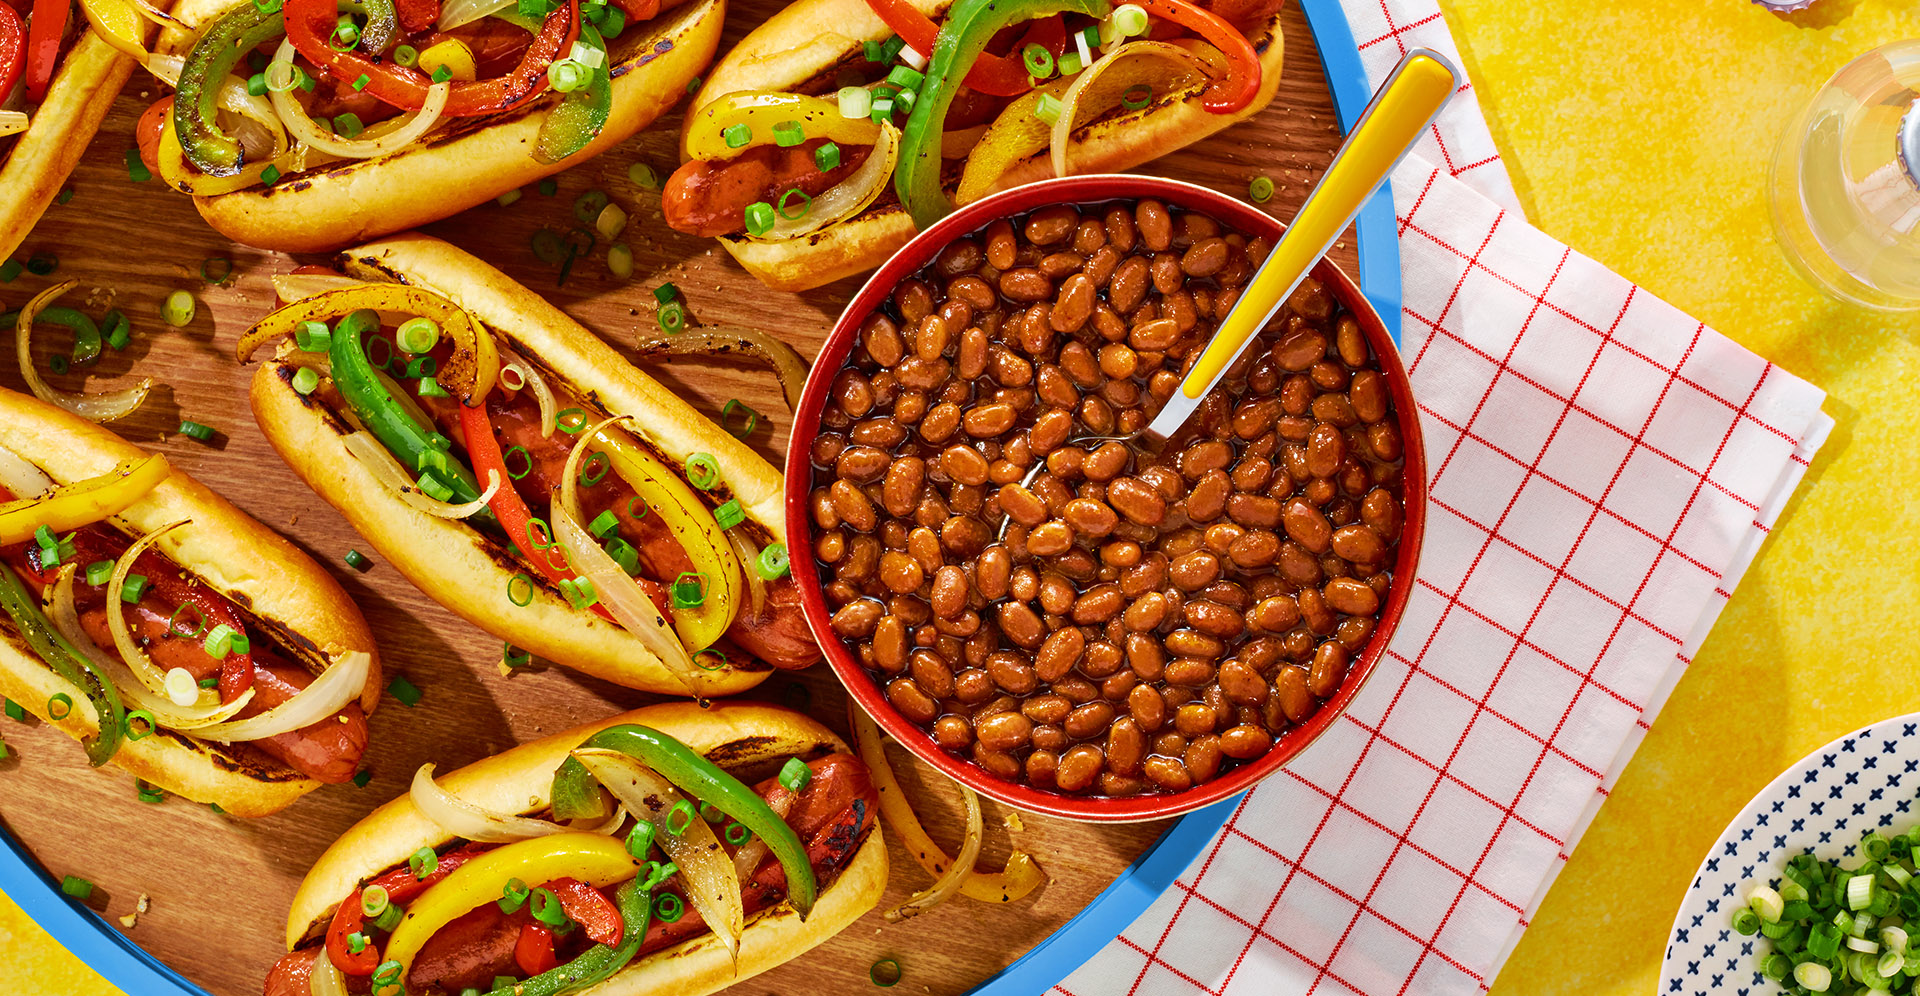 A blue serving tray loaded with several fajita dogs and a red bowl full of sweet head beans sitting on a yellow table.